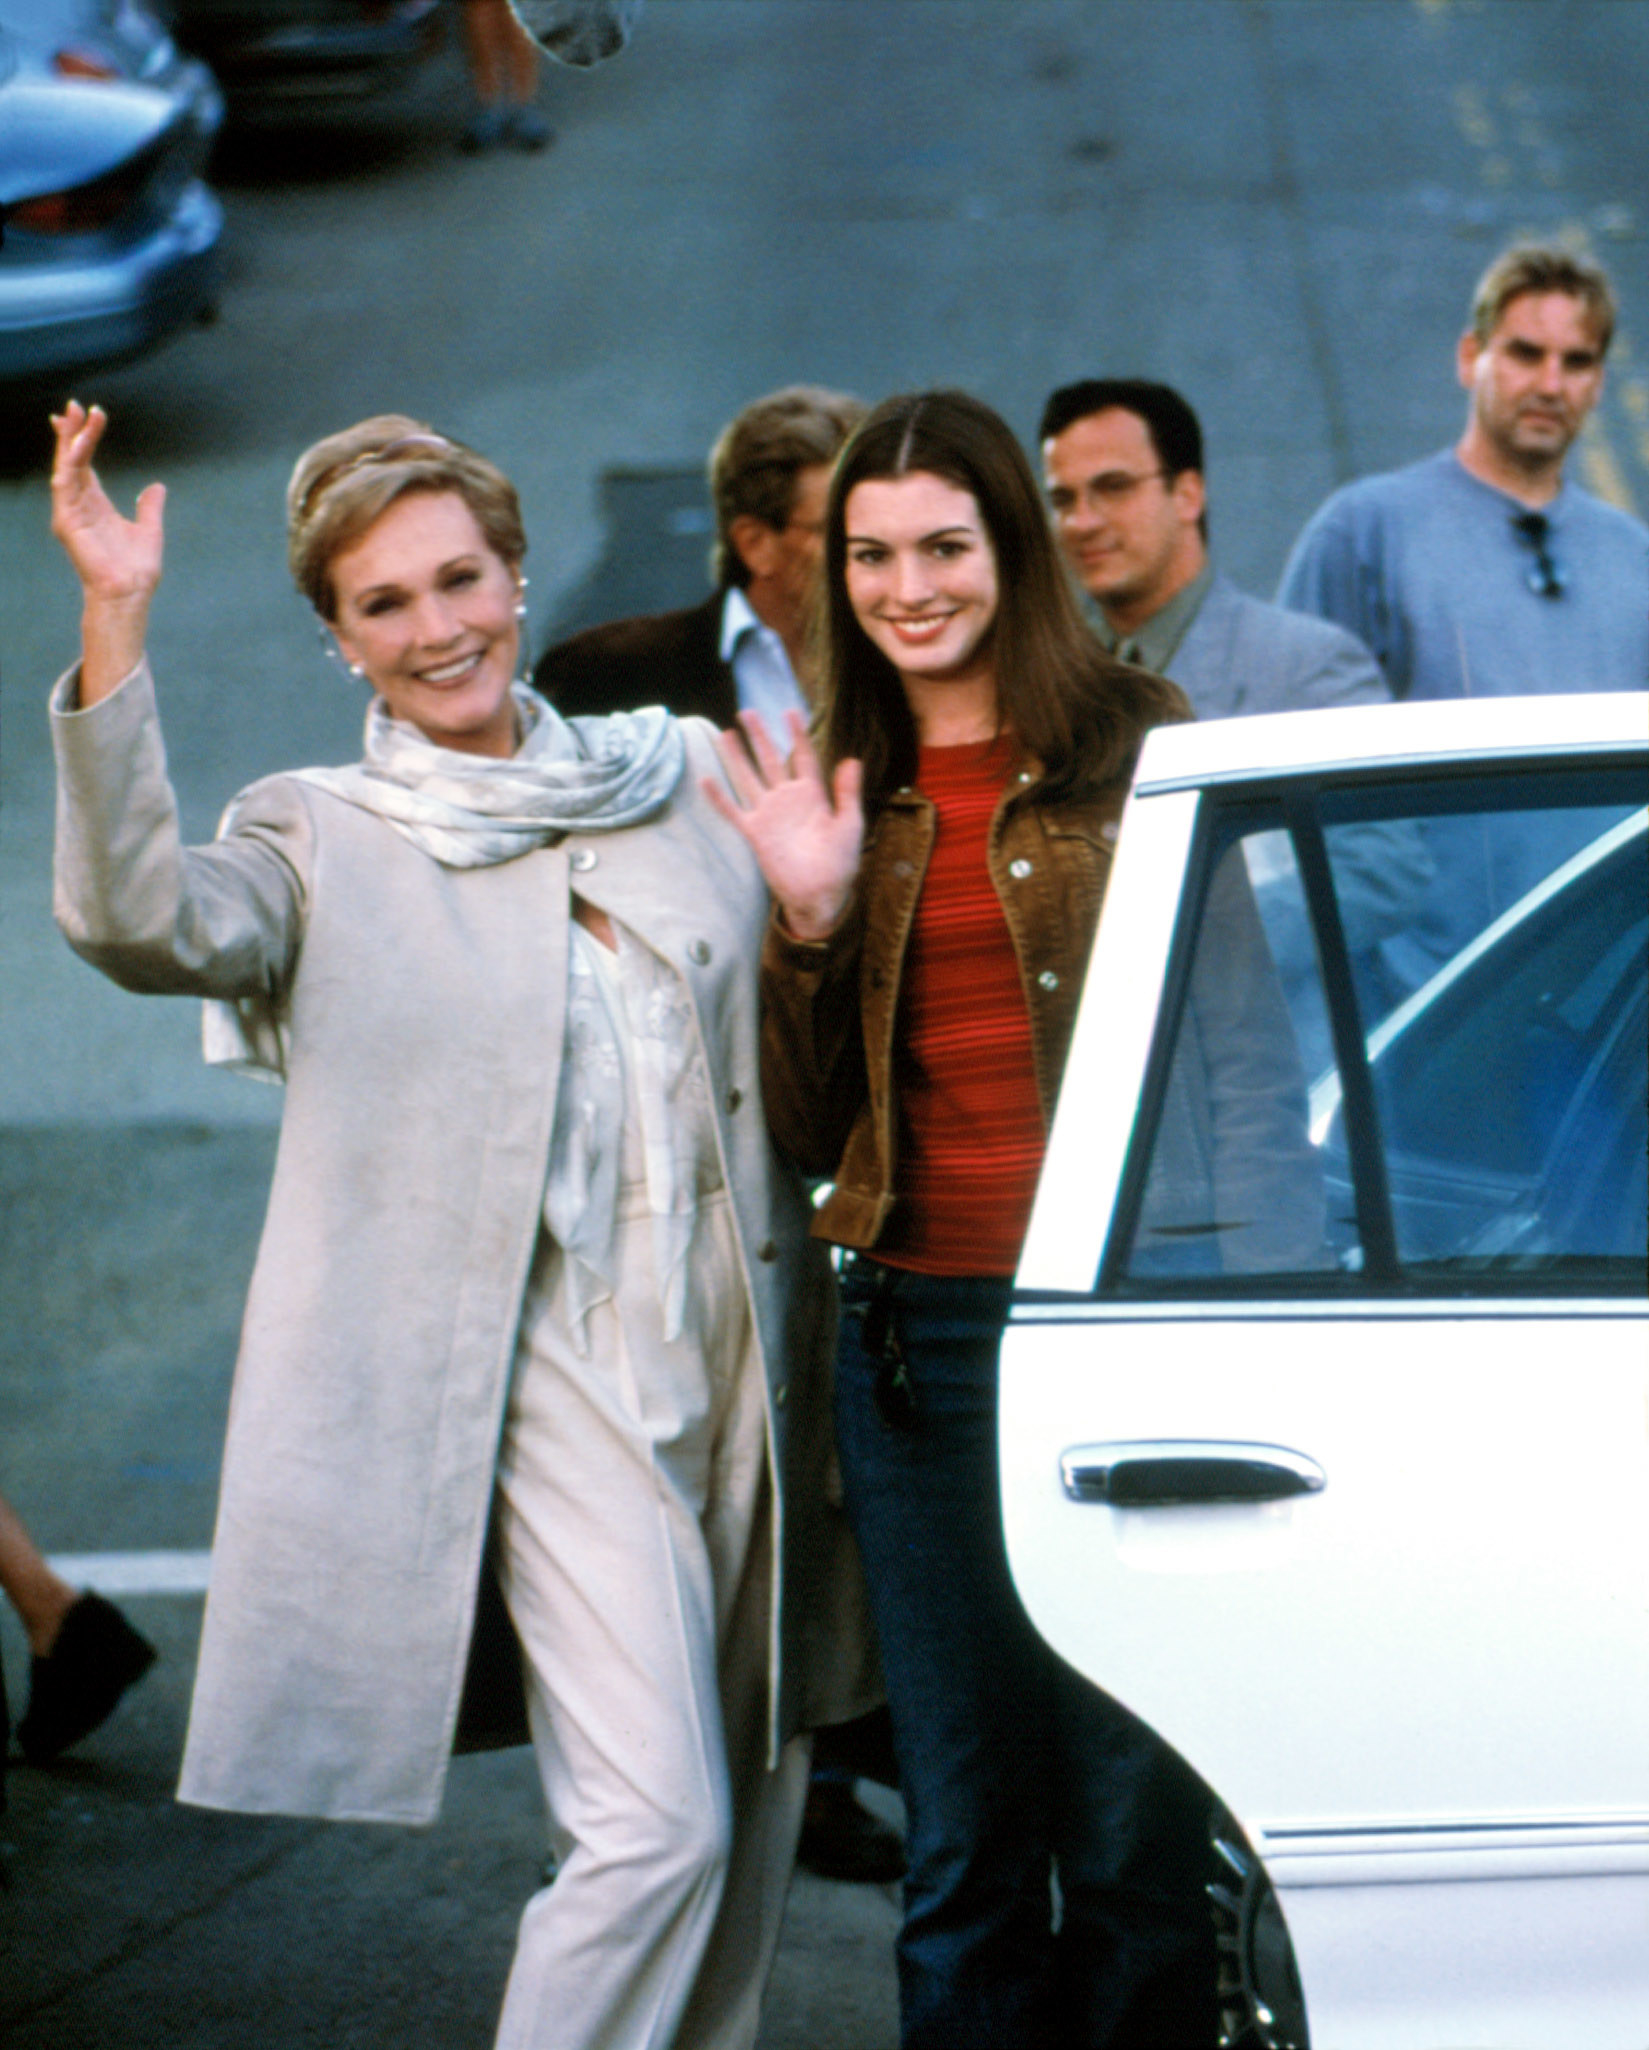 Julie and Anne waving next to a car